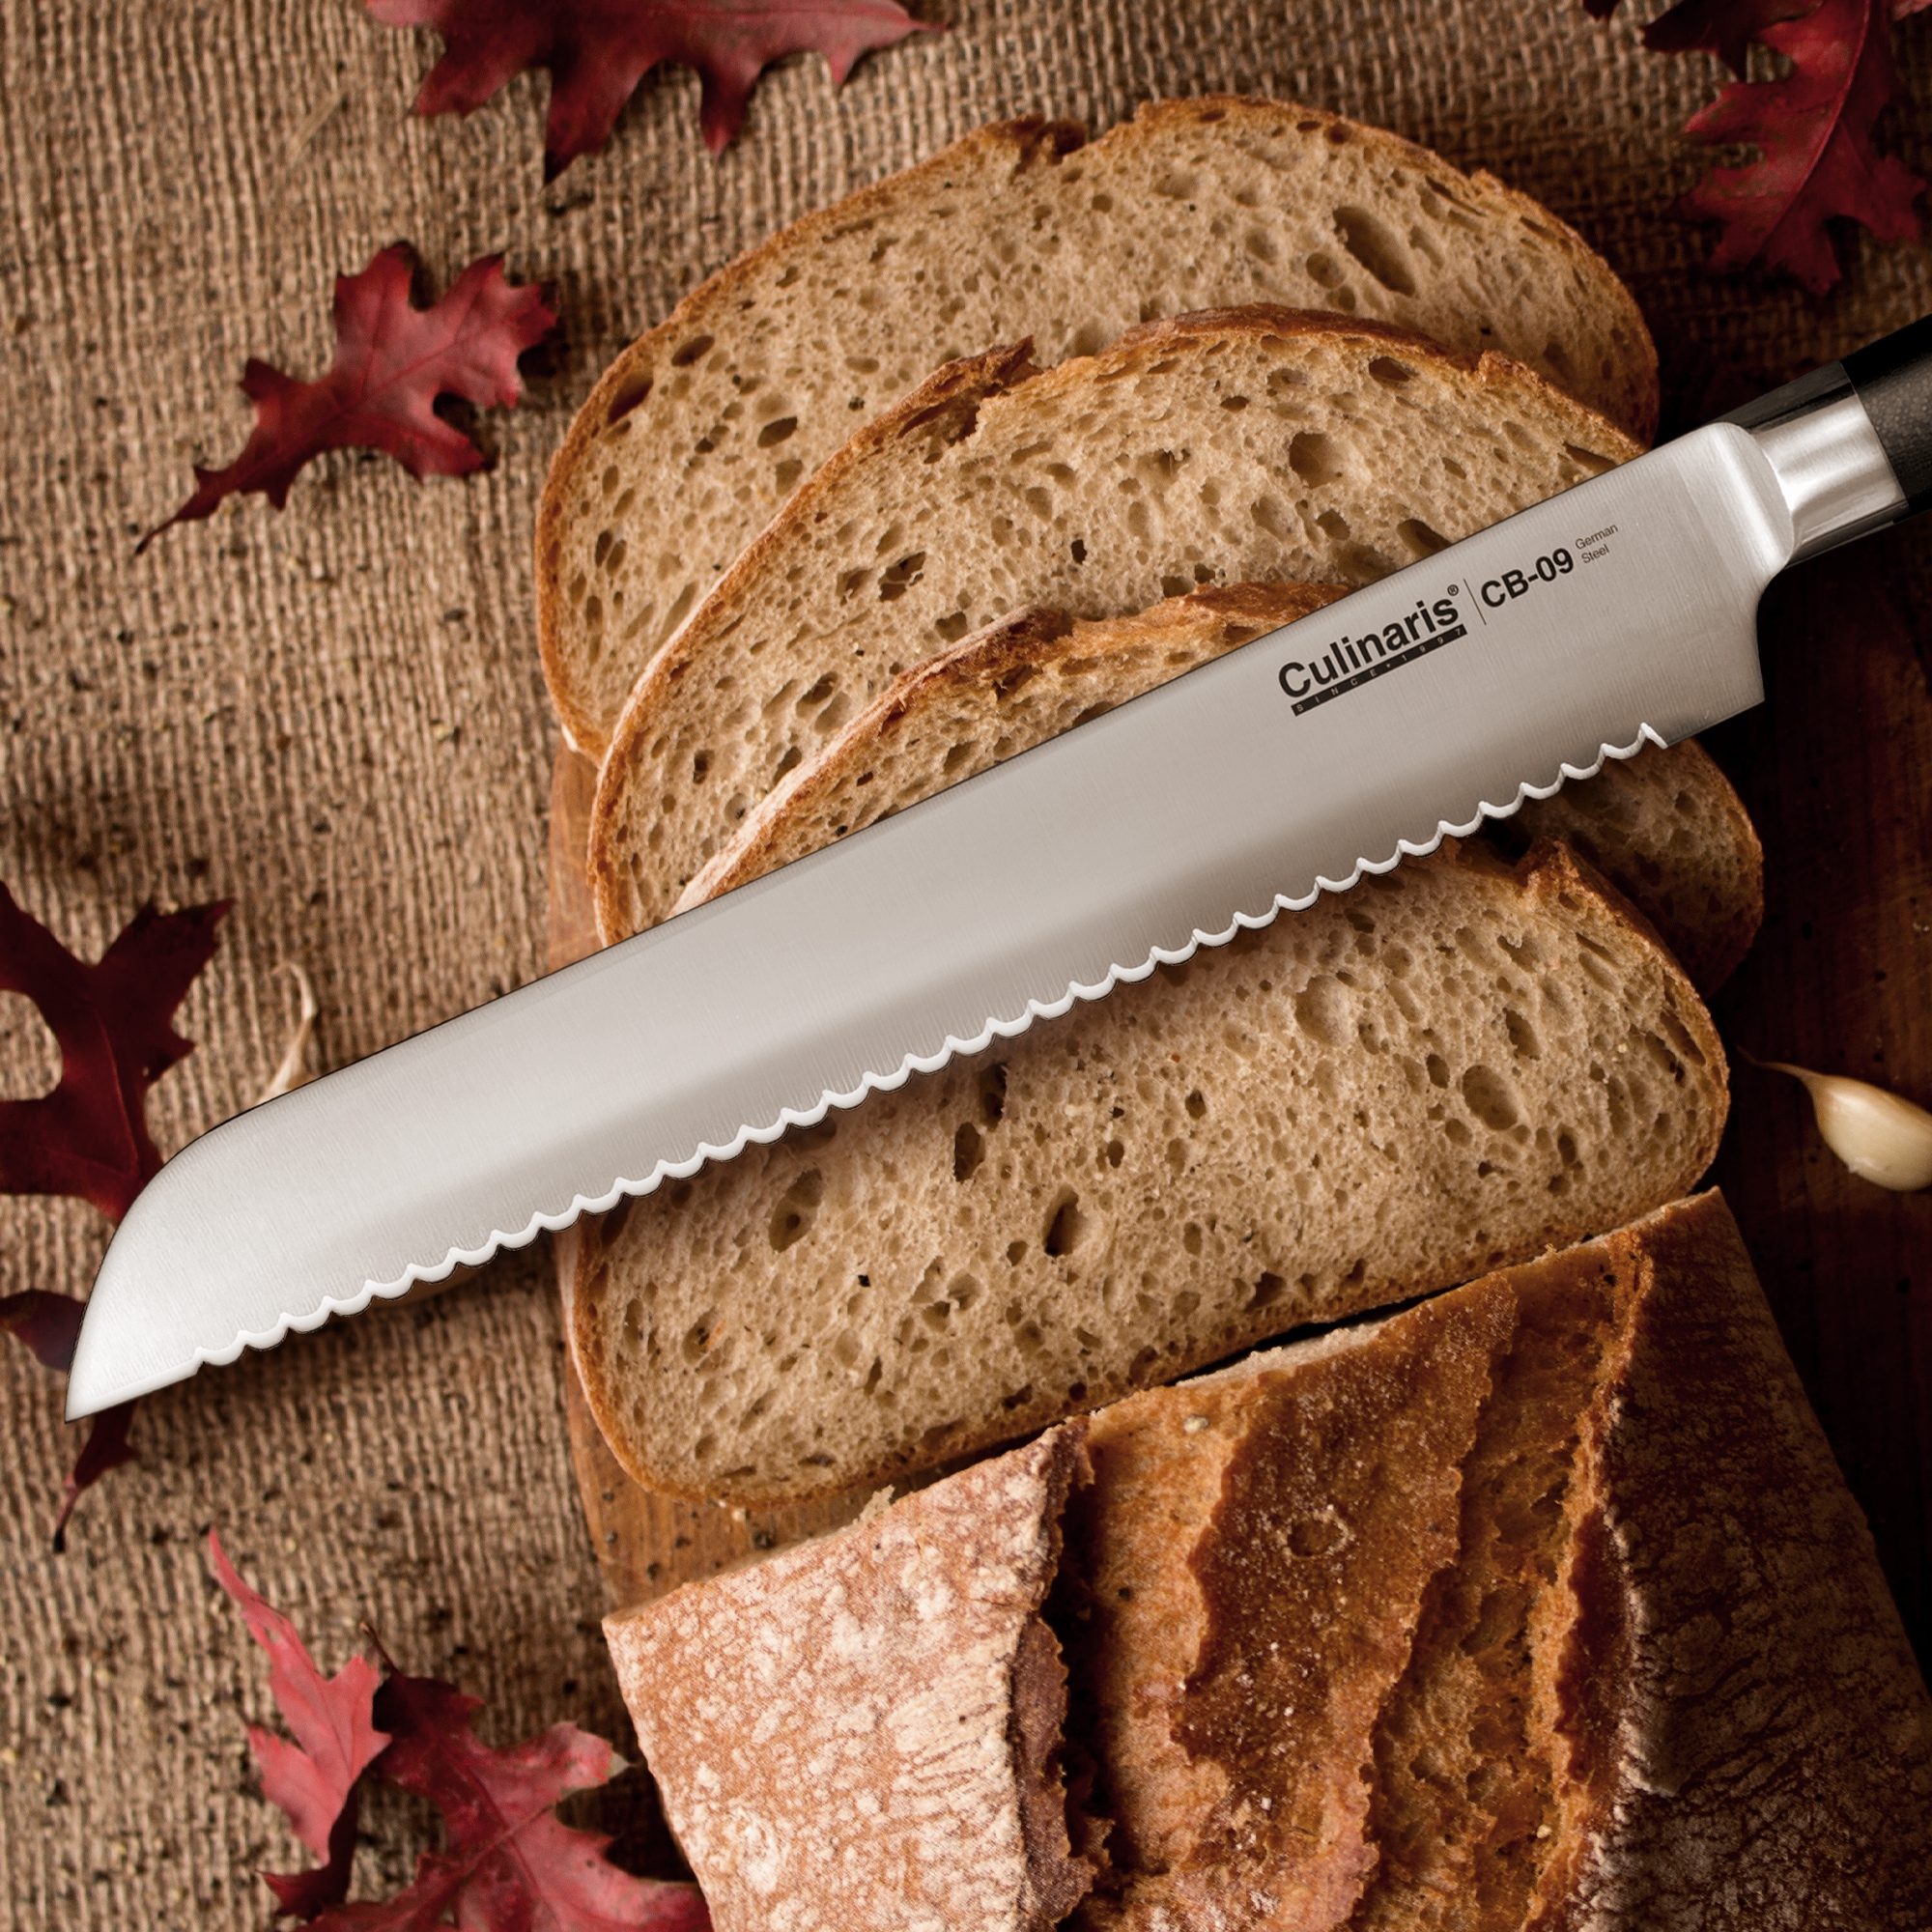 Culinaris - Bread Knife double-sided sharpened blade 25 cm